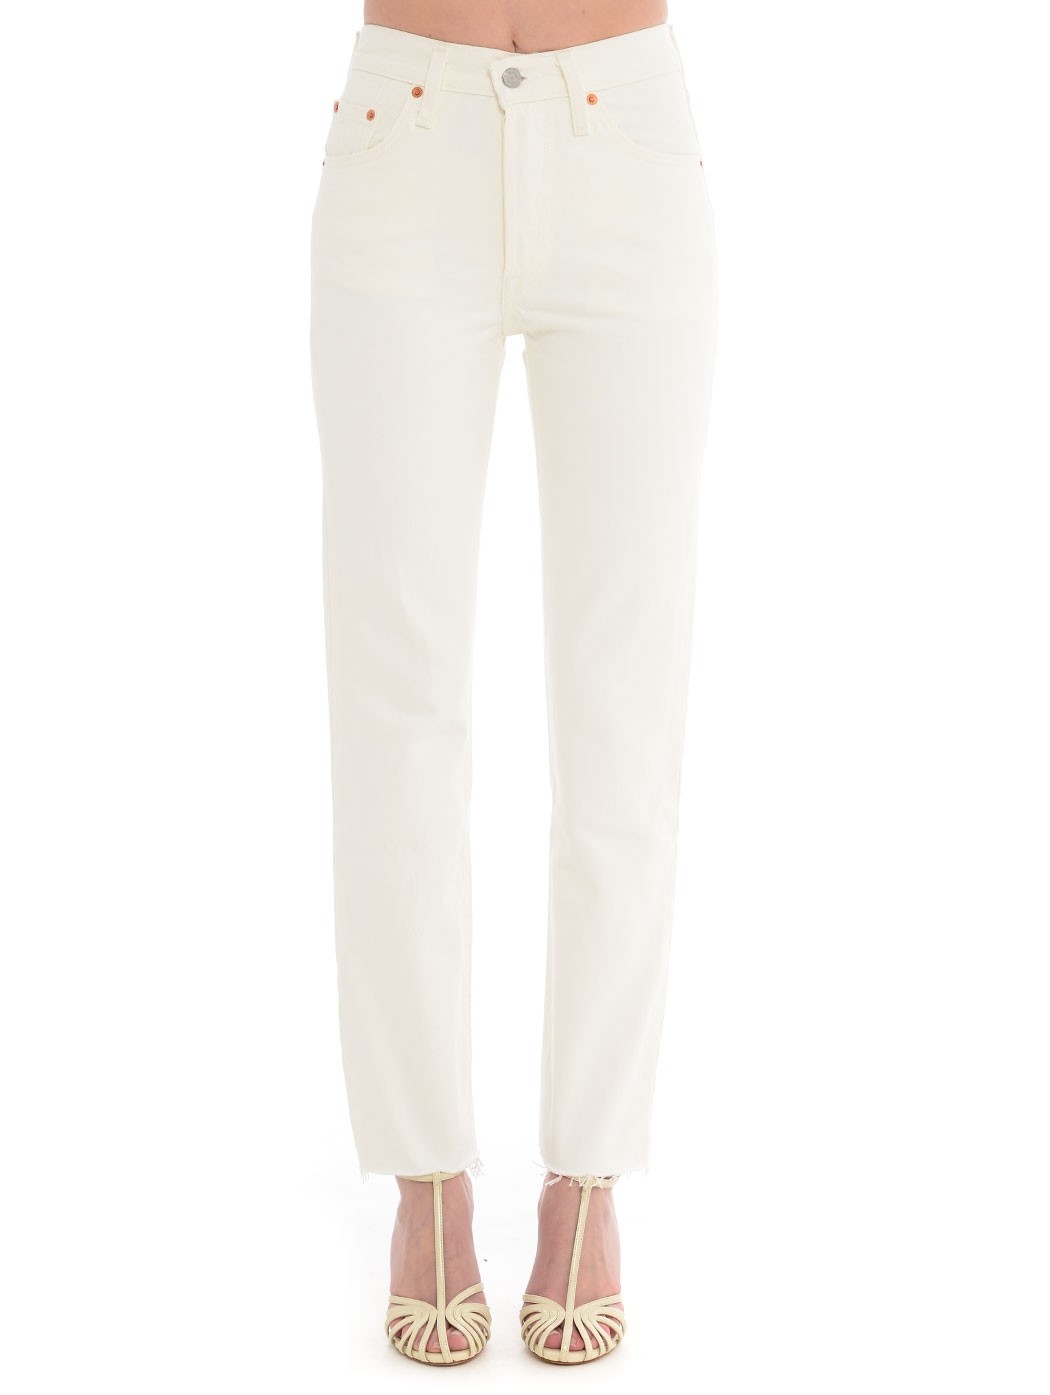  WOMAN TROUSERS,PALAZZO TROUSERS,SKINNY TROUSERS,MARNI TROUSERS,FORTE FORTE TROUSERS,8PM TROUSERS,MSGM TROUSERS,CROP PANTS  LEVI'S A12501